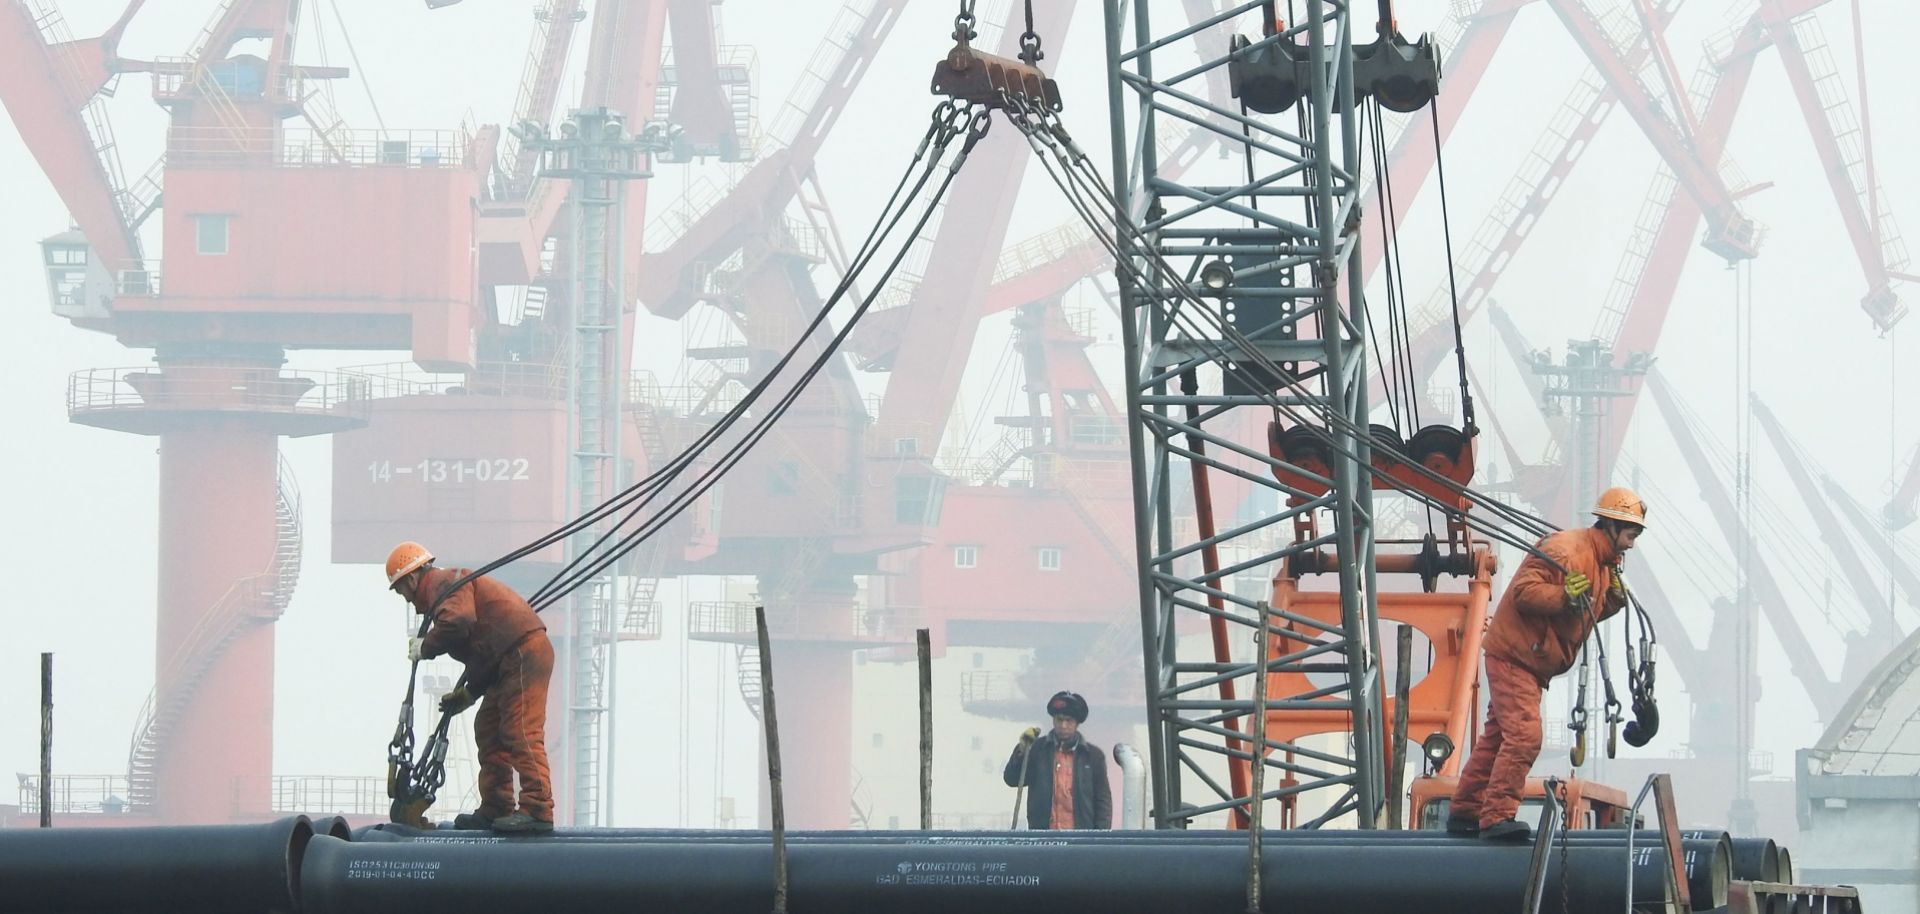 Chinese workers prepare to load pipes onto a ship in the port of Lianyungang on Jan. 14, 2019.